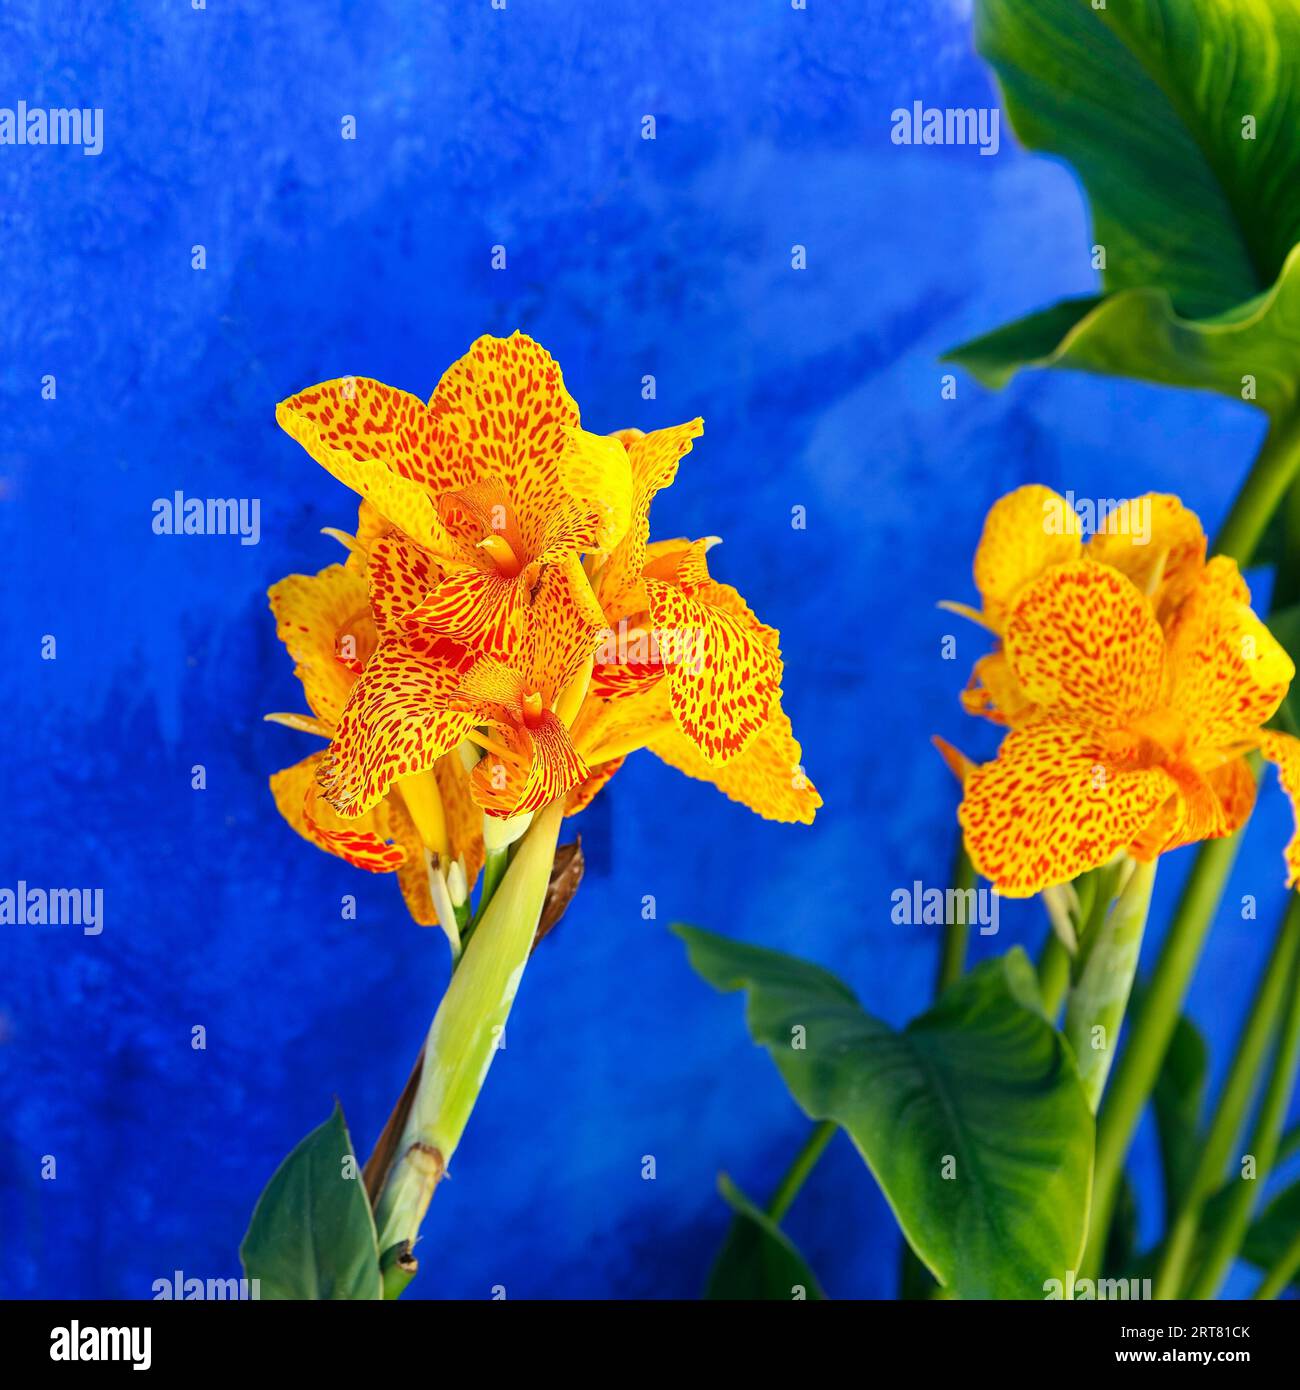 Pretoria canna lily (Canna indica), yellow flower in front of blue wall, colourful detail, Obidos, Portugal Stock Photo